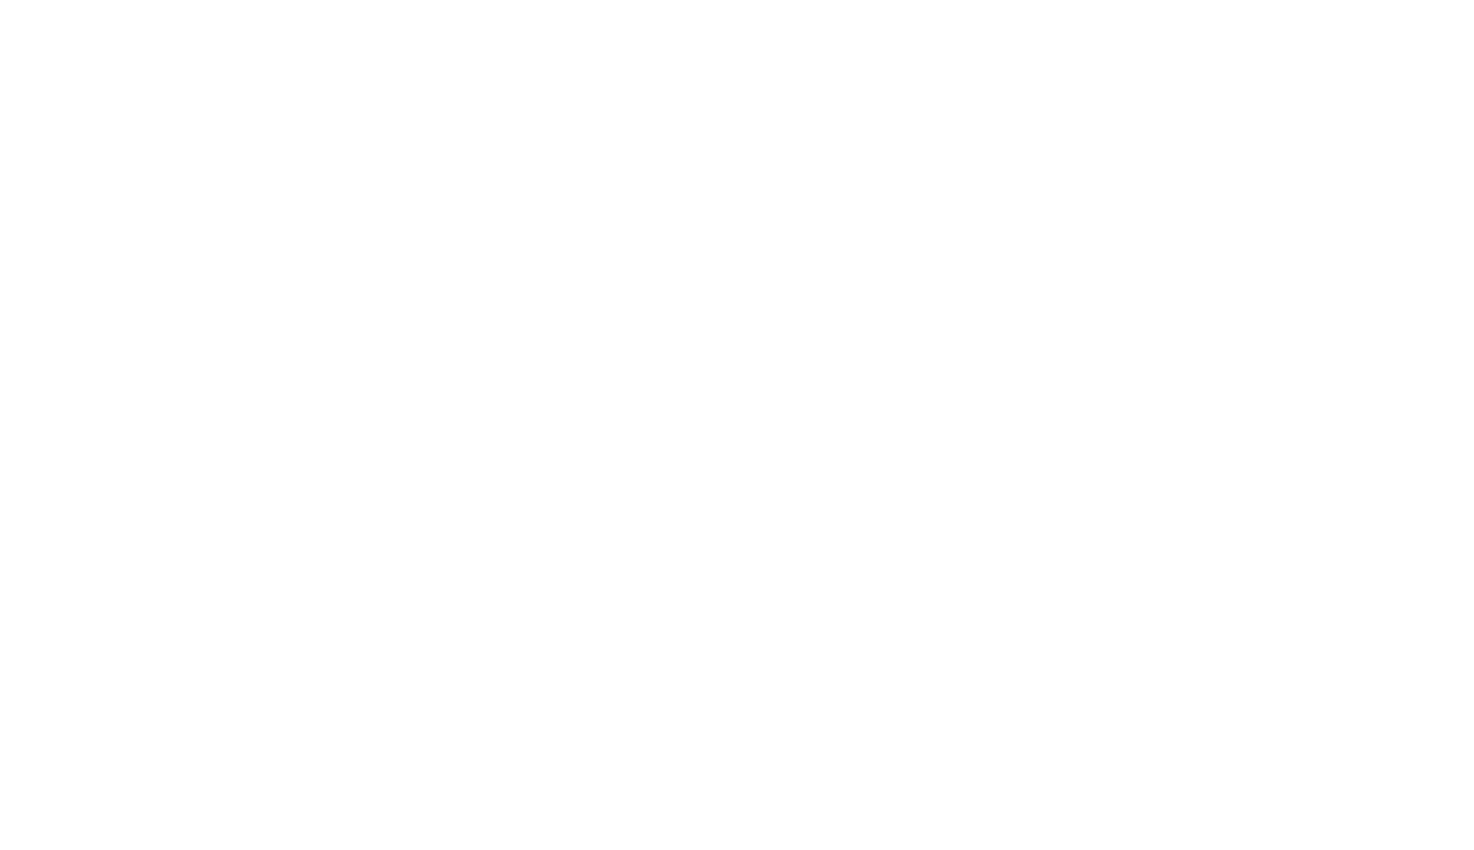 GoJee is a Xero connected app